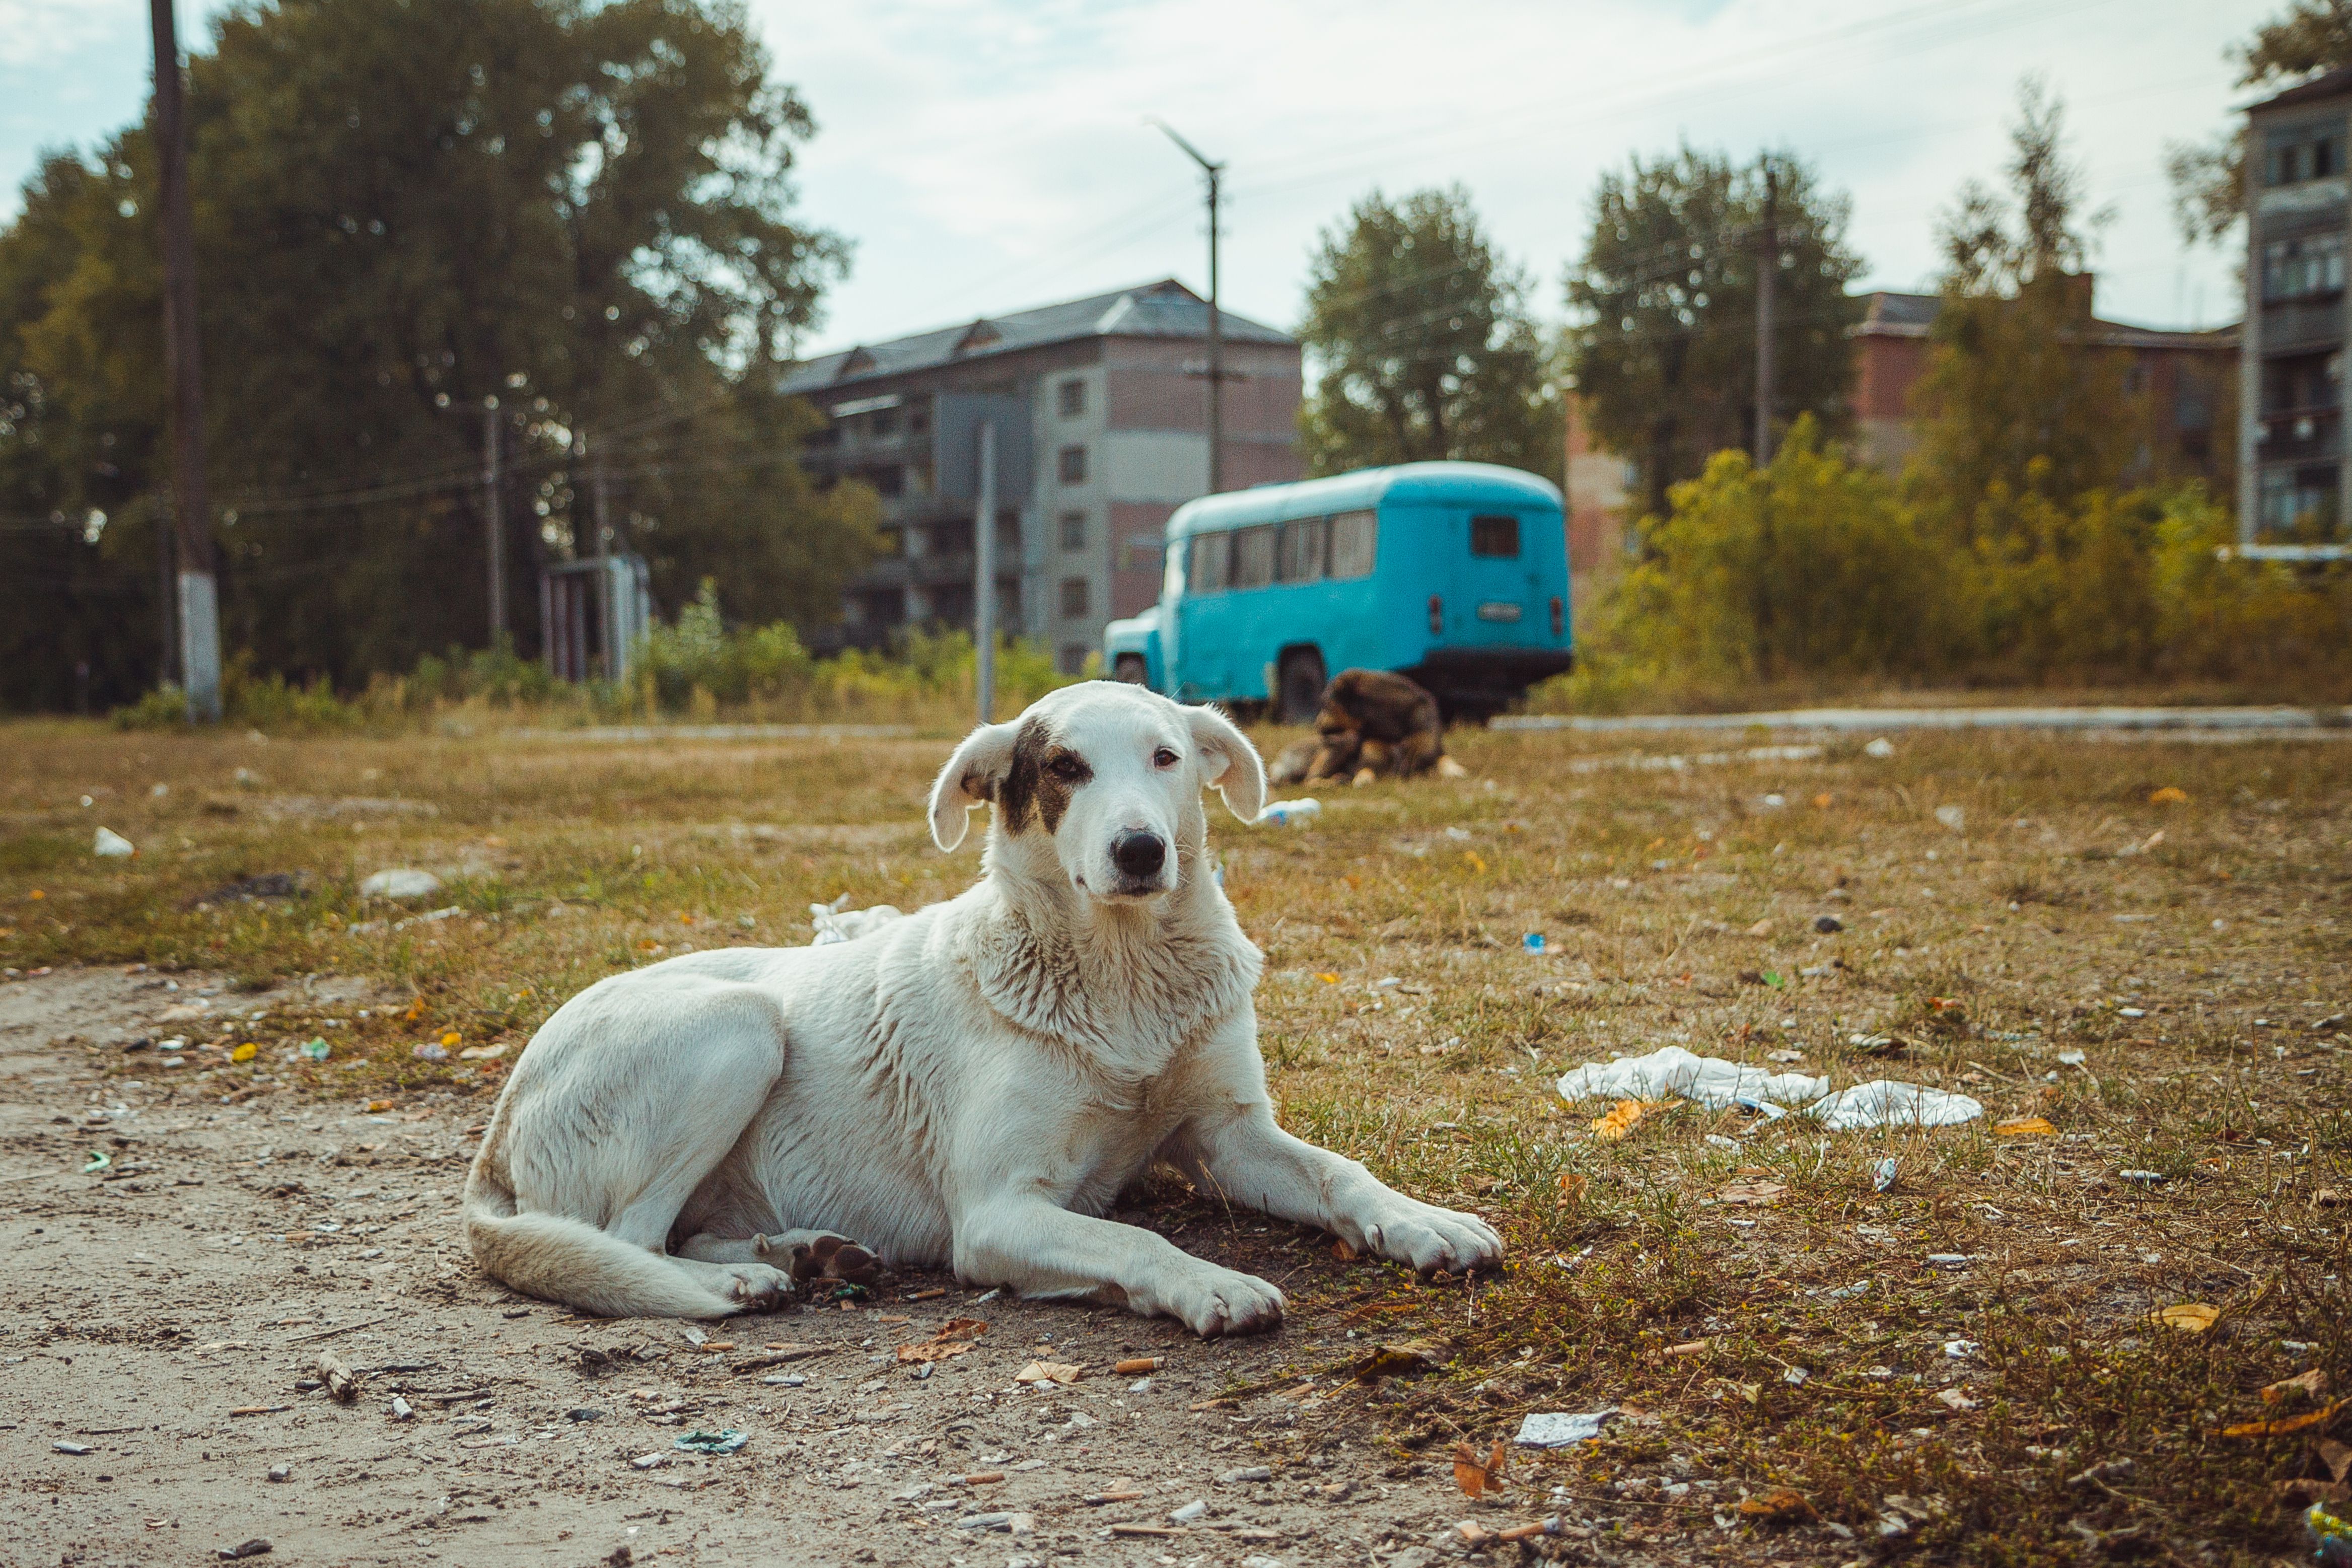 Homeless wild dog in old radioactive zone in Pripyat city - abandoned ghost town after nuclear disaster. Chernobyl exclusion zone. | Foto von: Sergiy Romanyuk via Shutterstock